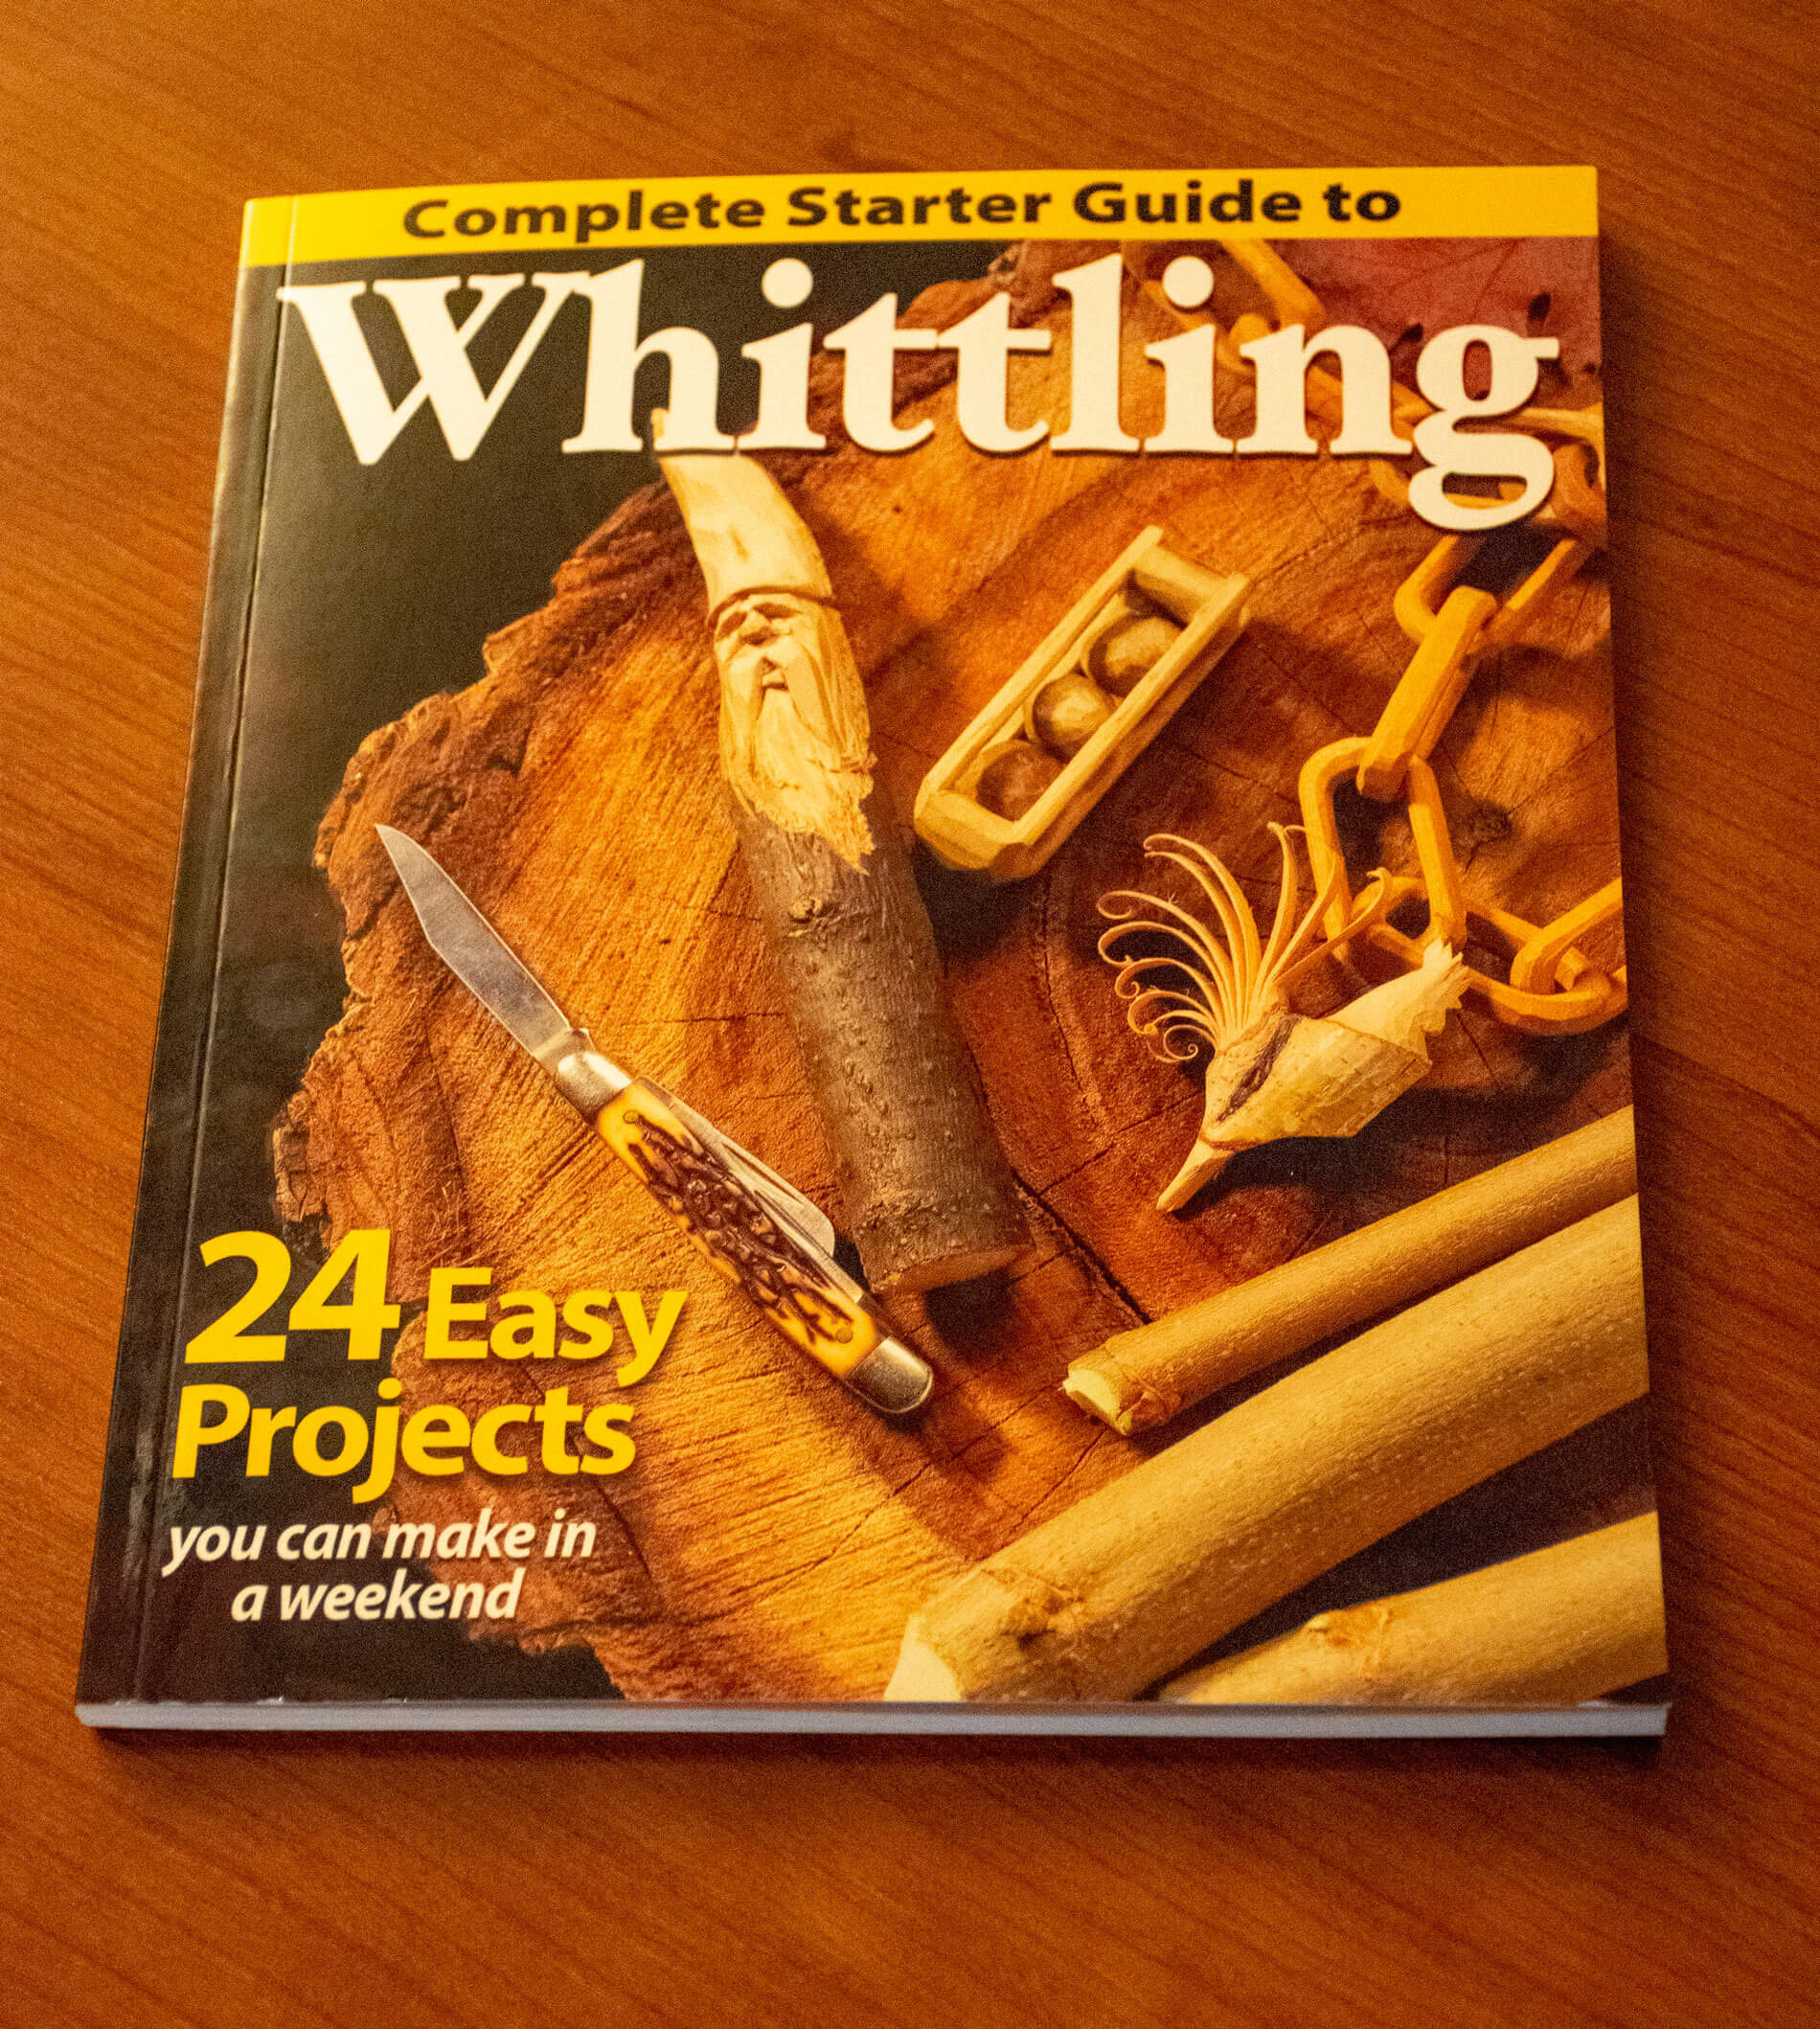 Complete Starter Guide to Whittling - BSA CAC Scout Shop